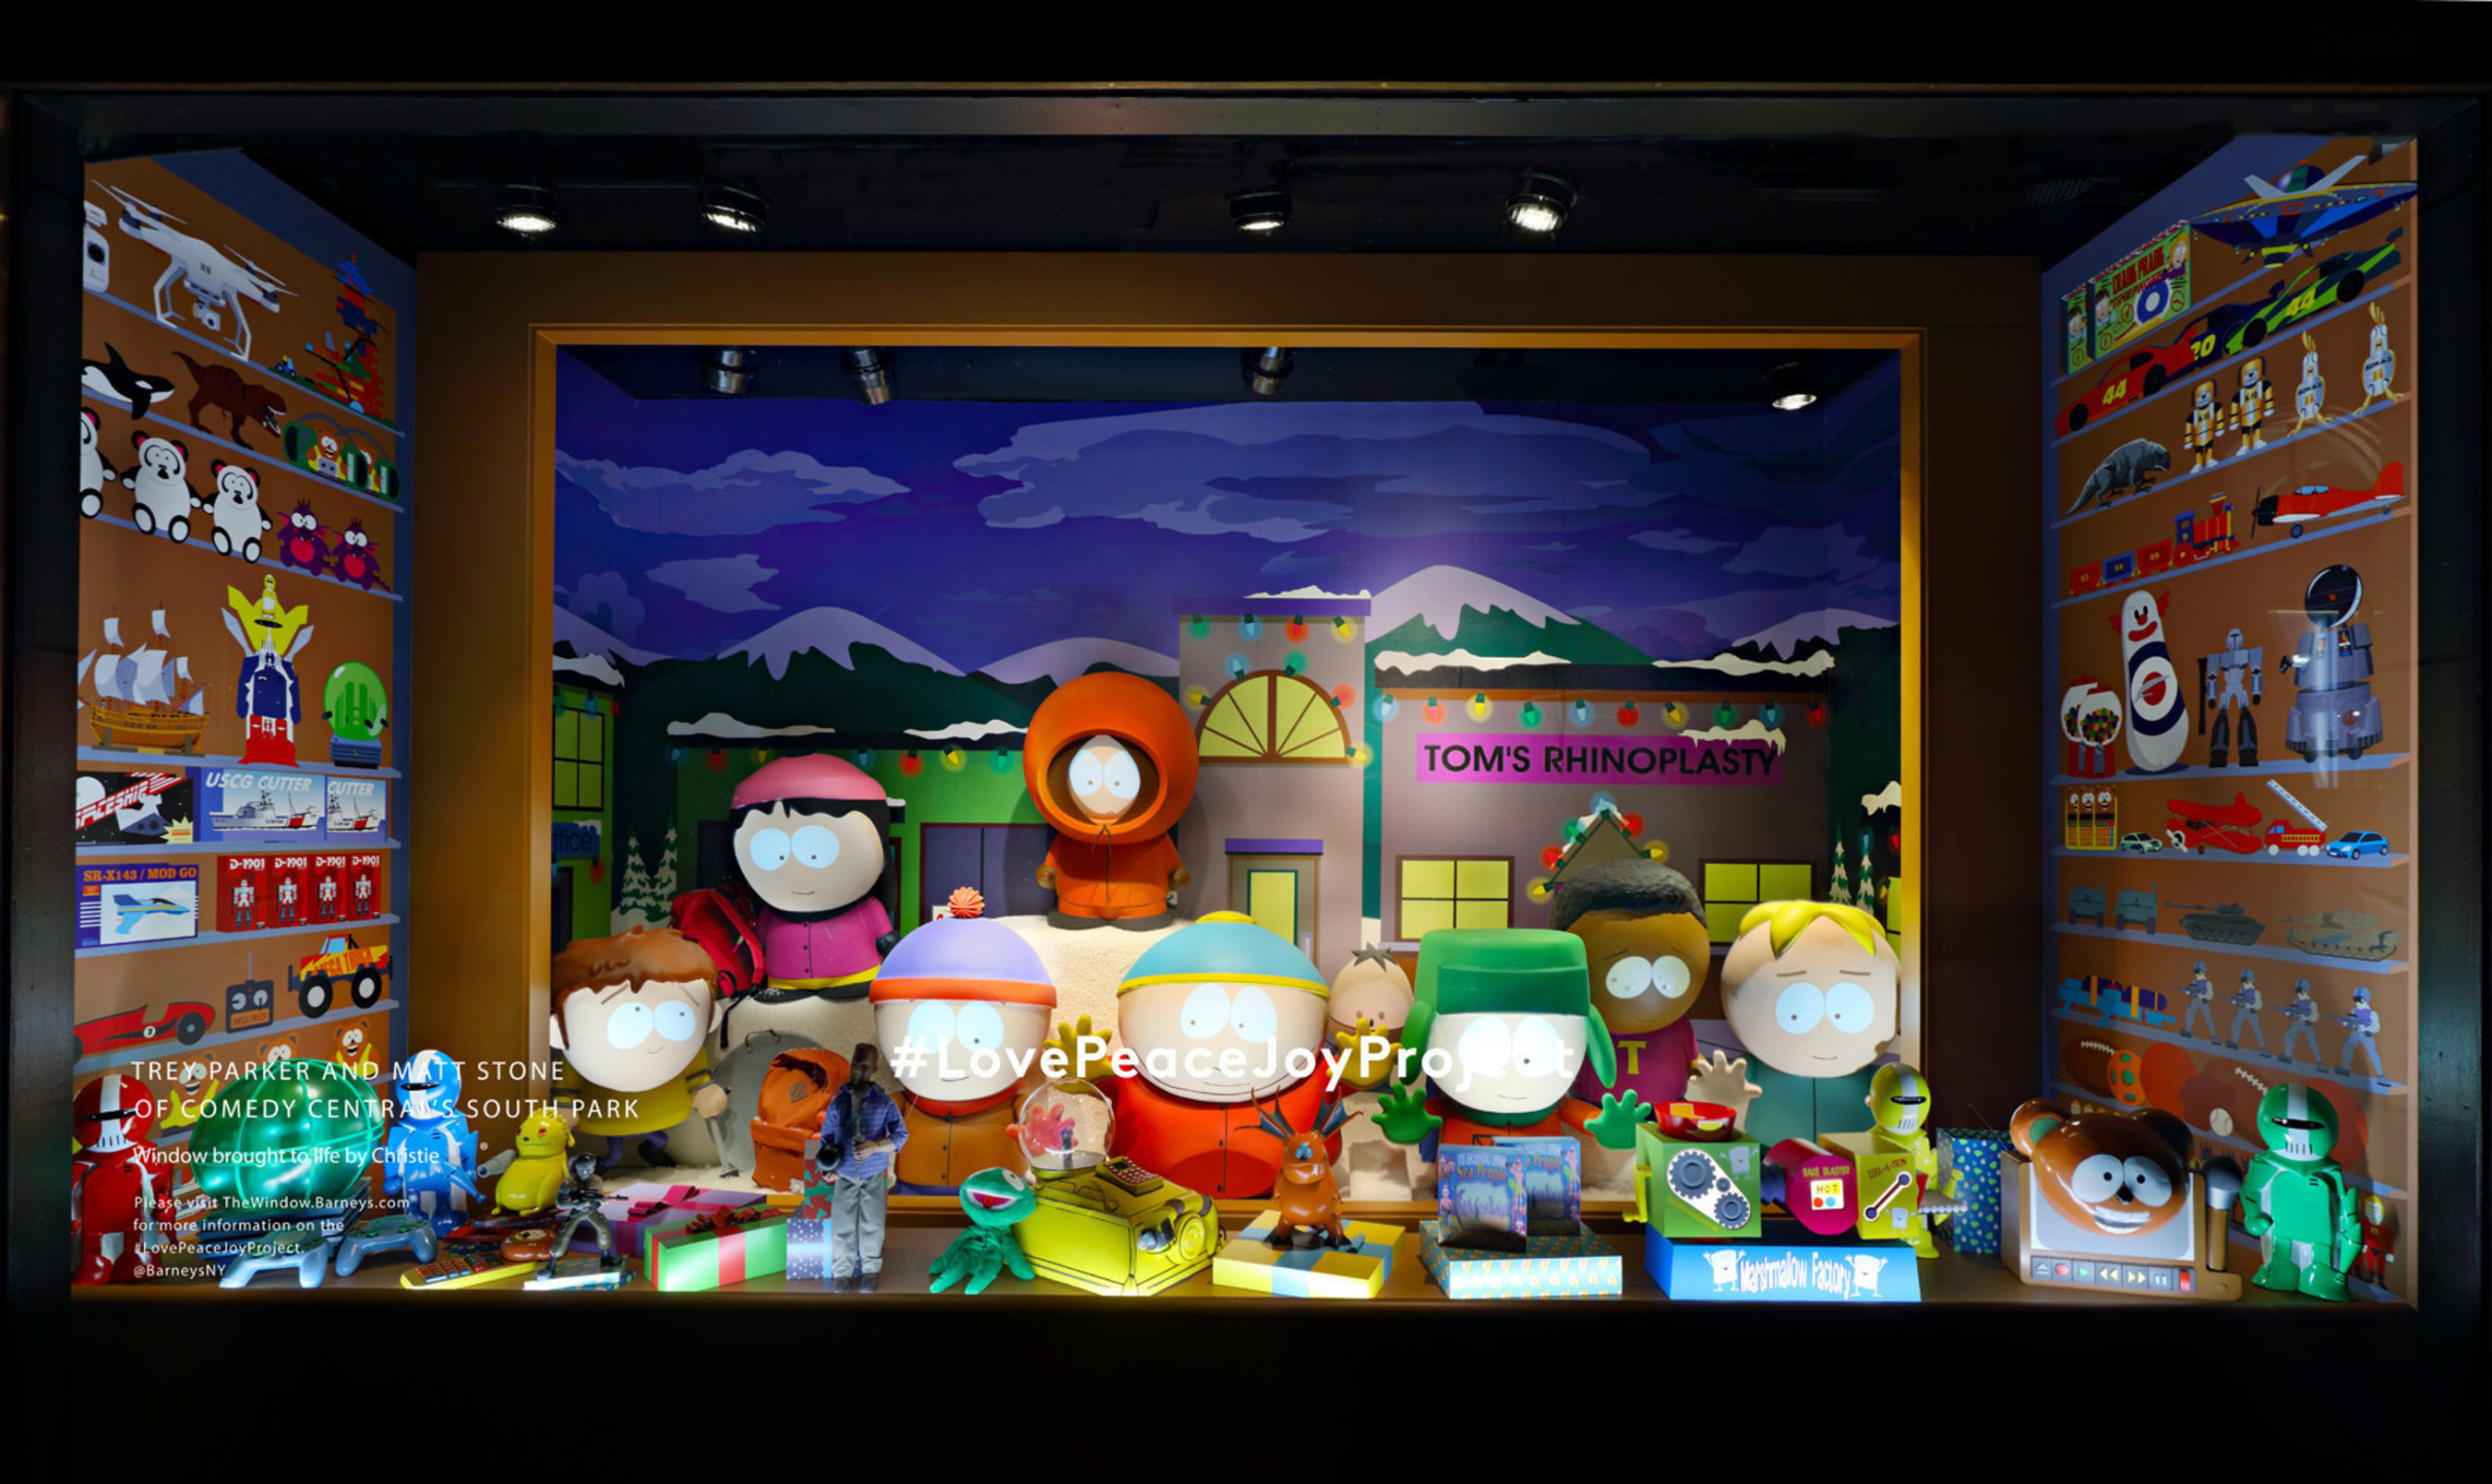 Barneys New York Madison Avenue Holiday Window - Trey Parker and Matt Stone of Comedy Central's South Park